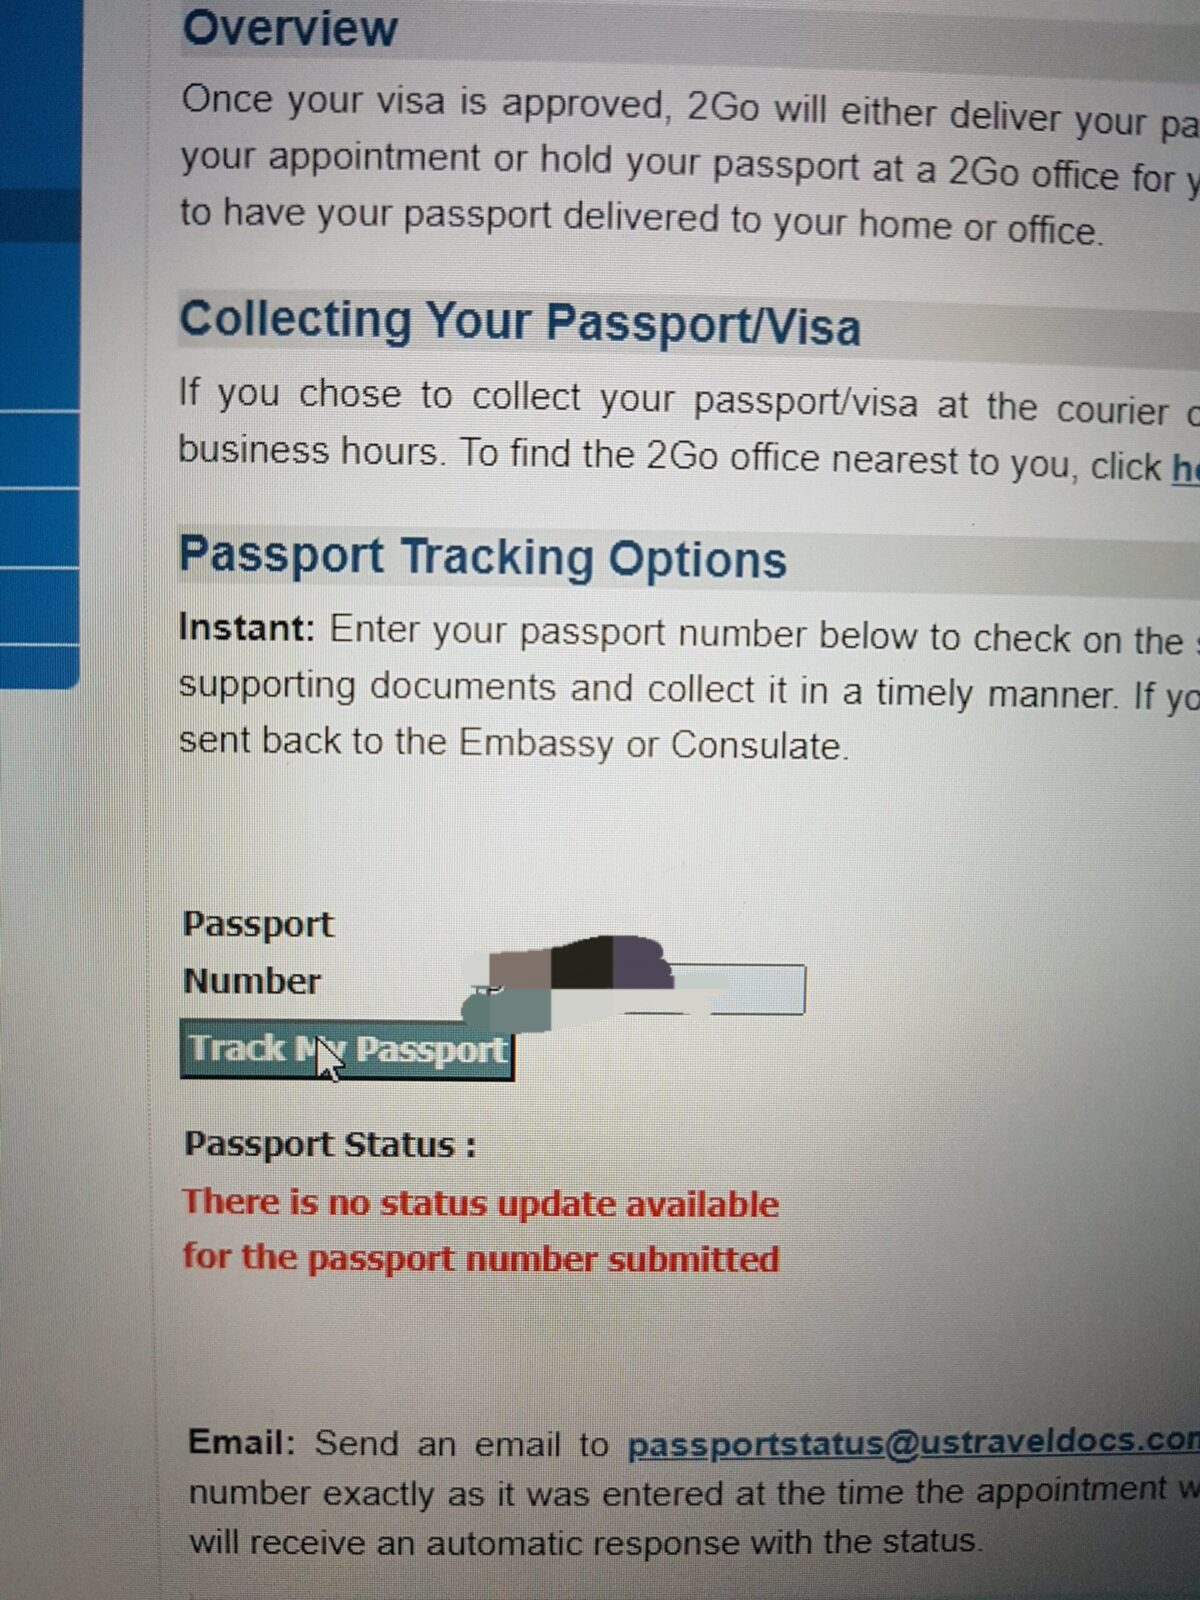 How to Track My Passport After Visa is Approved